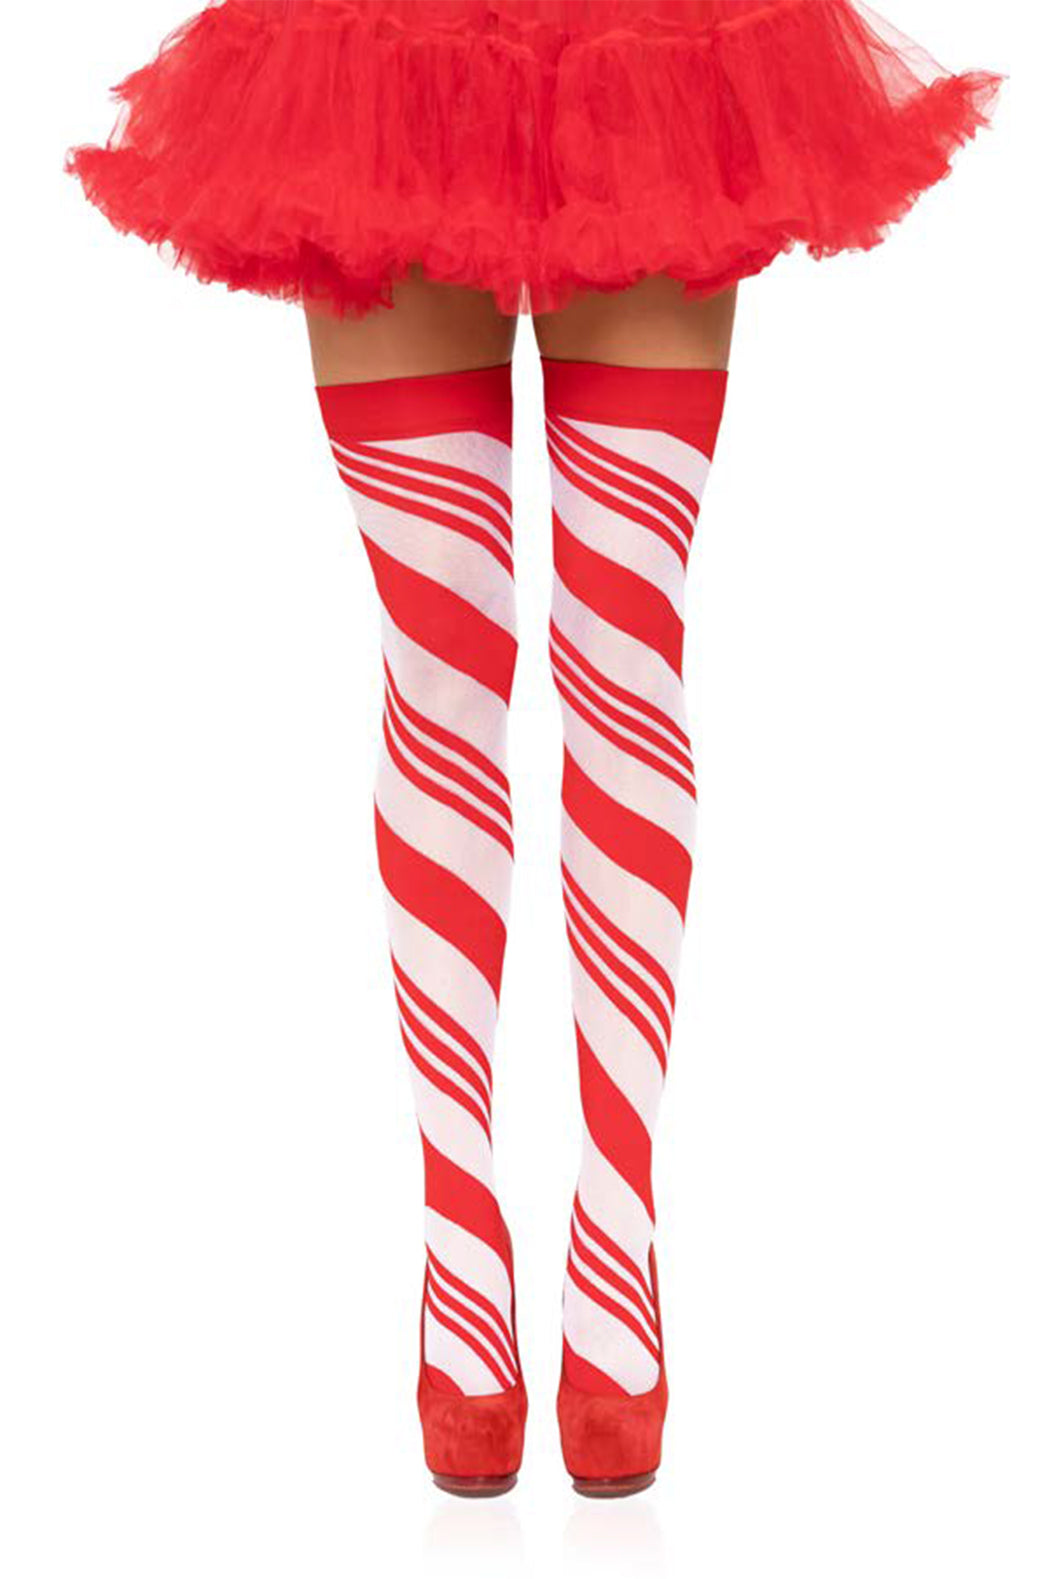 Candy cane striped thigh highs